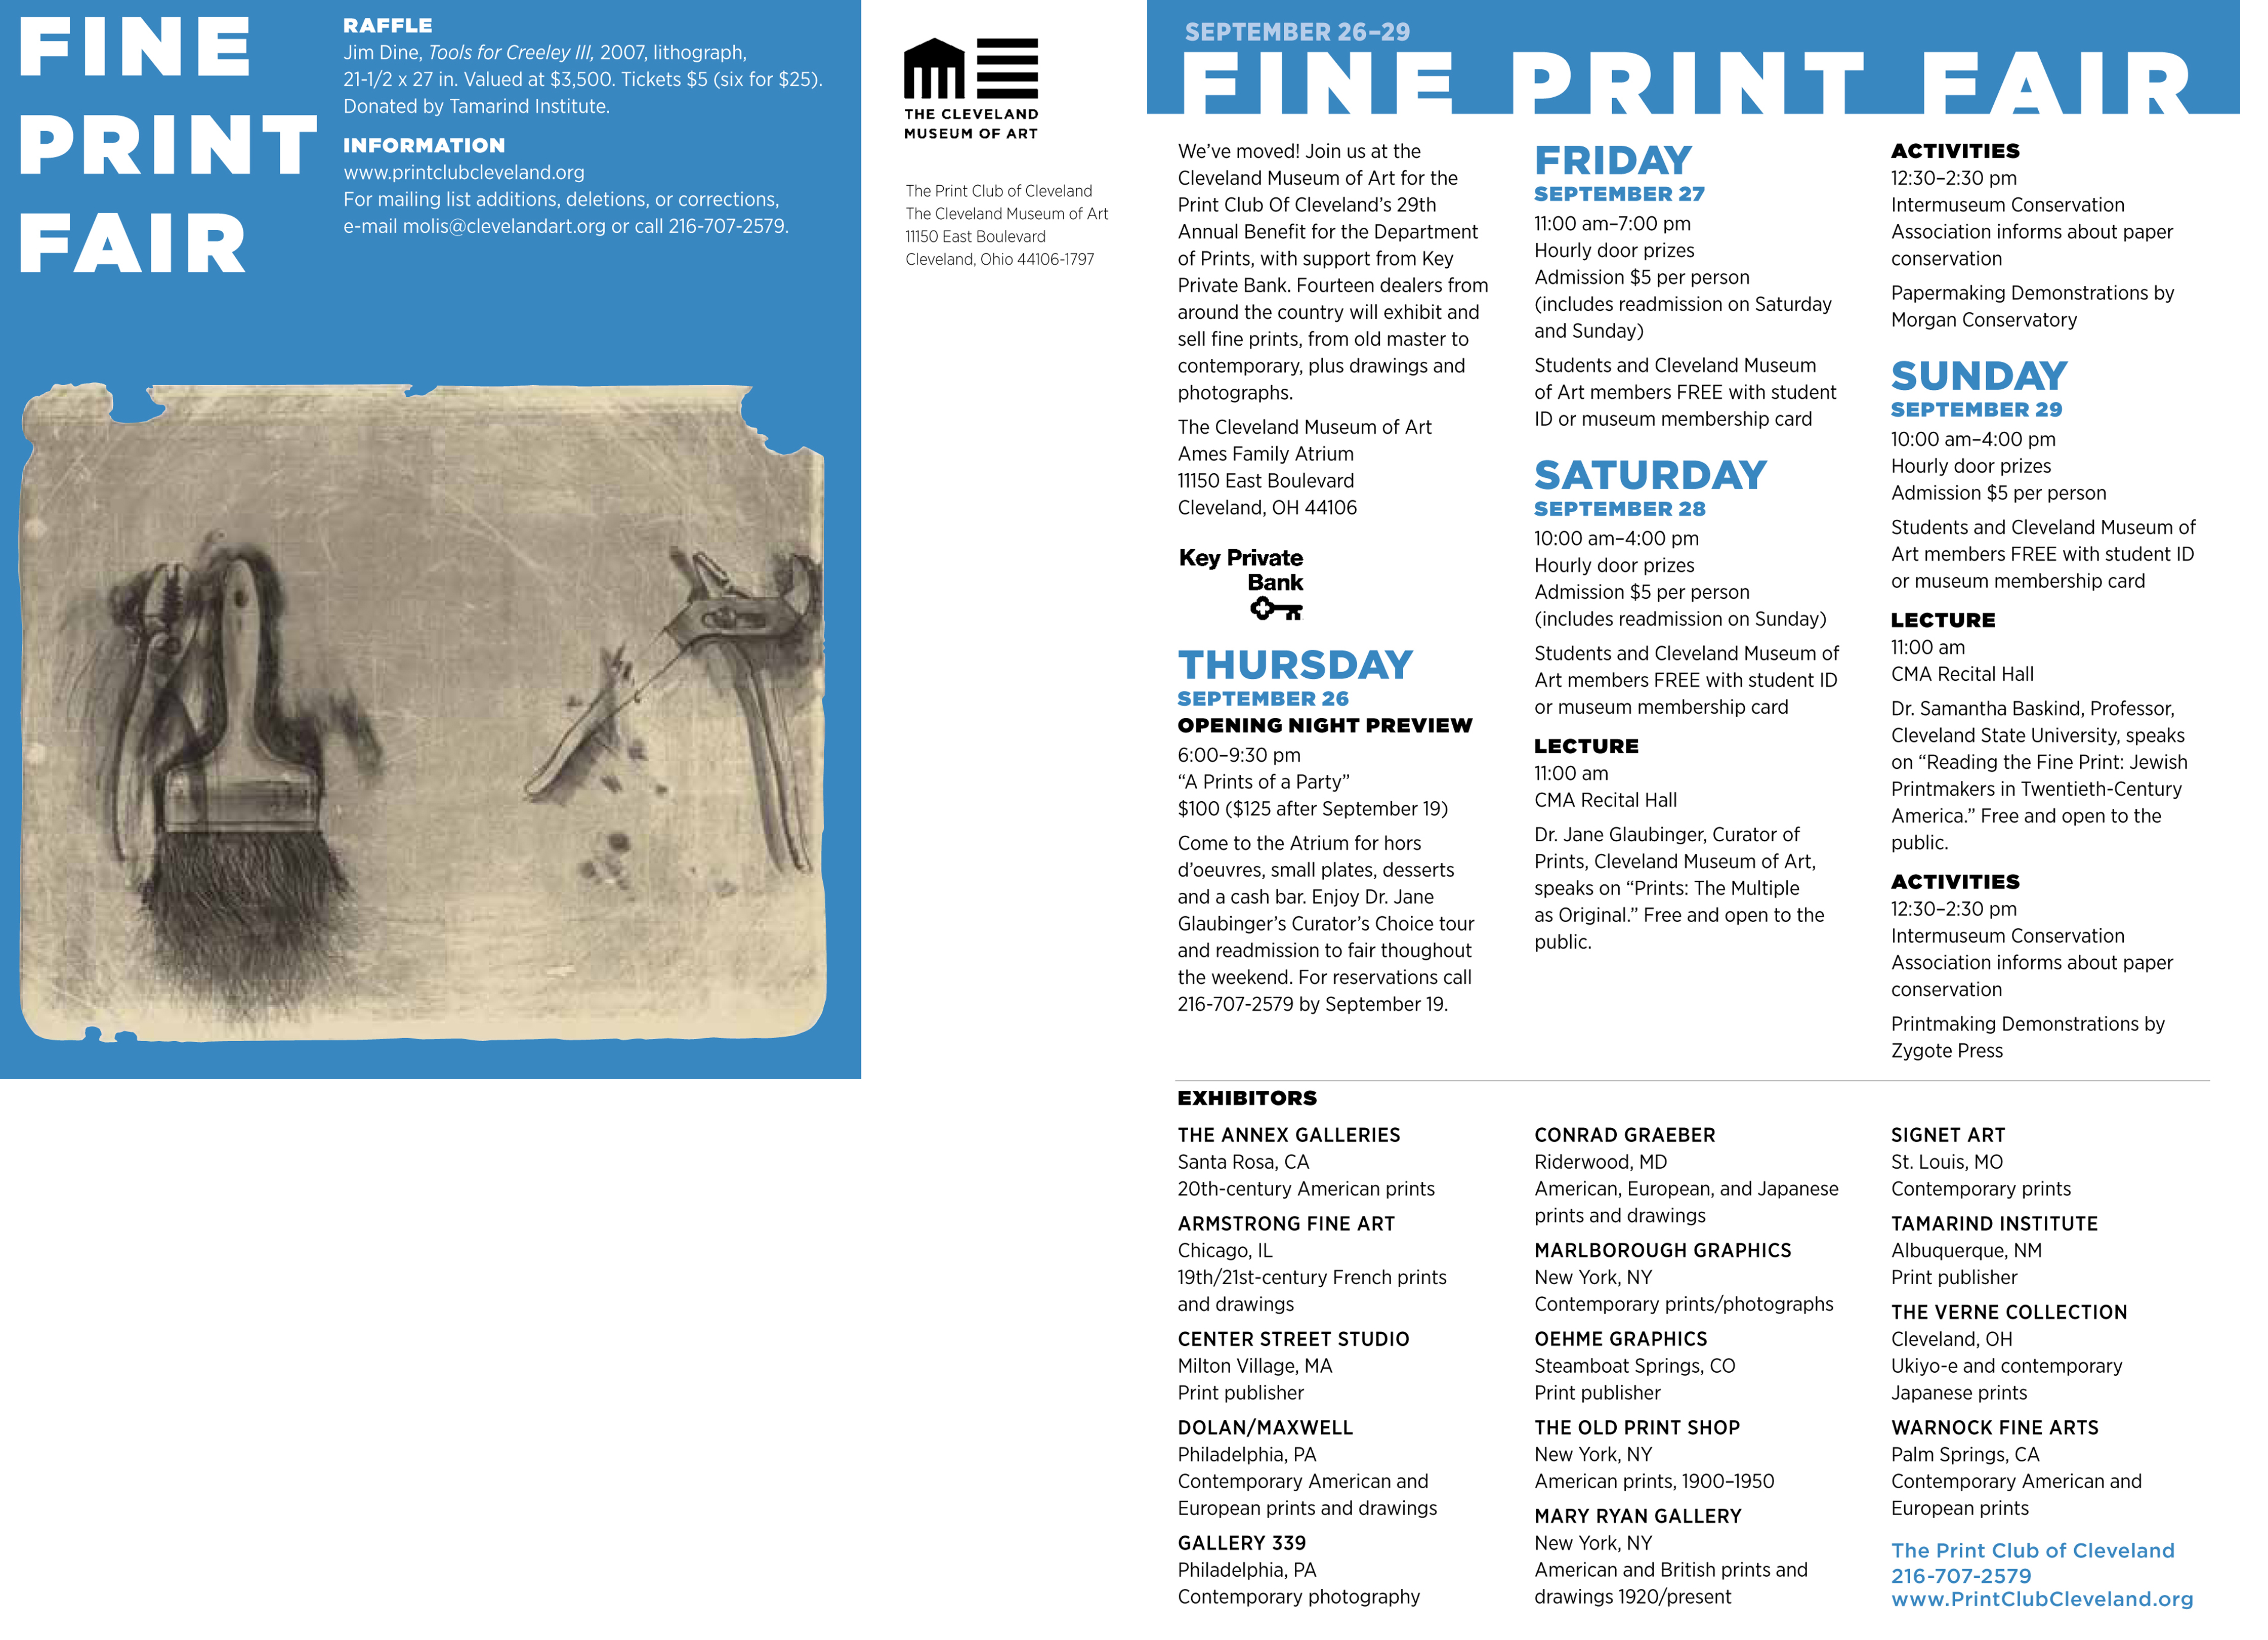 Uncategorized, Annex Galleries - On Fine Prints and Artists